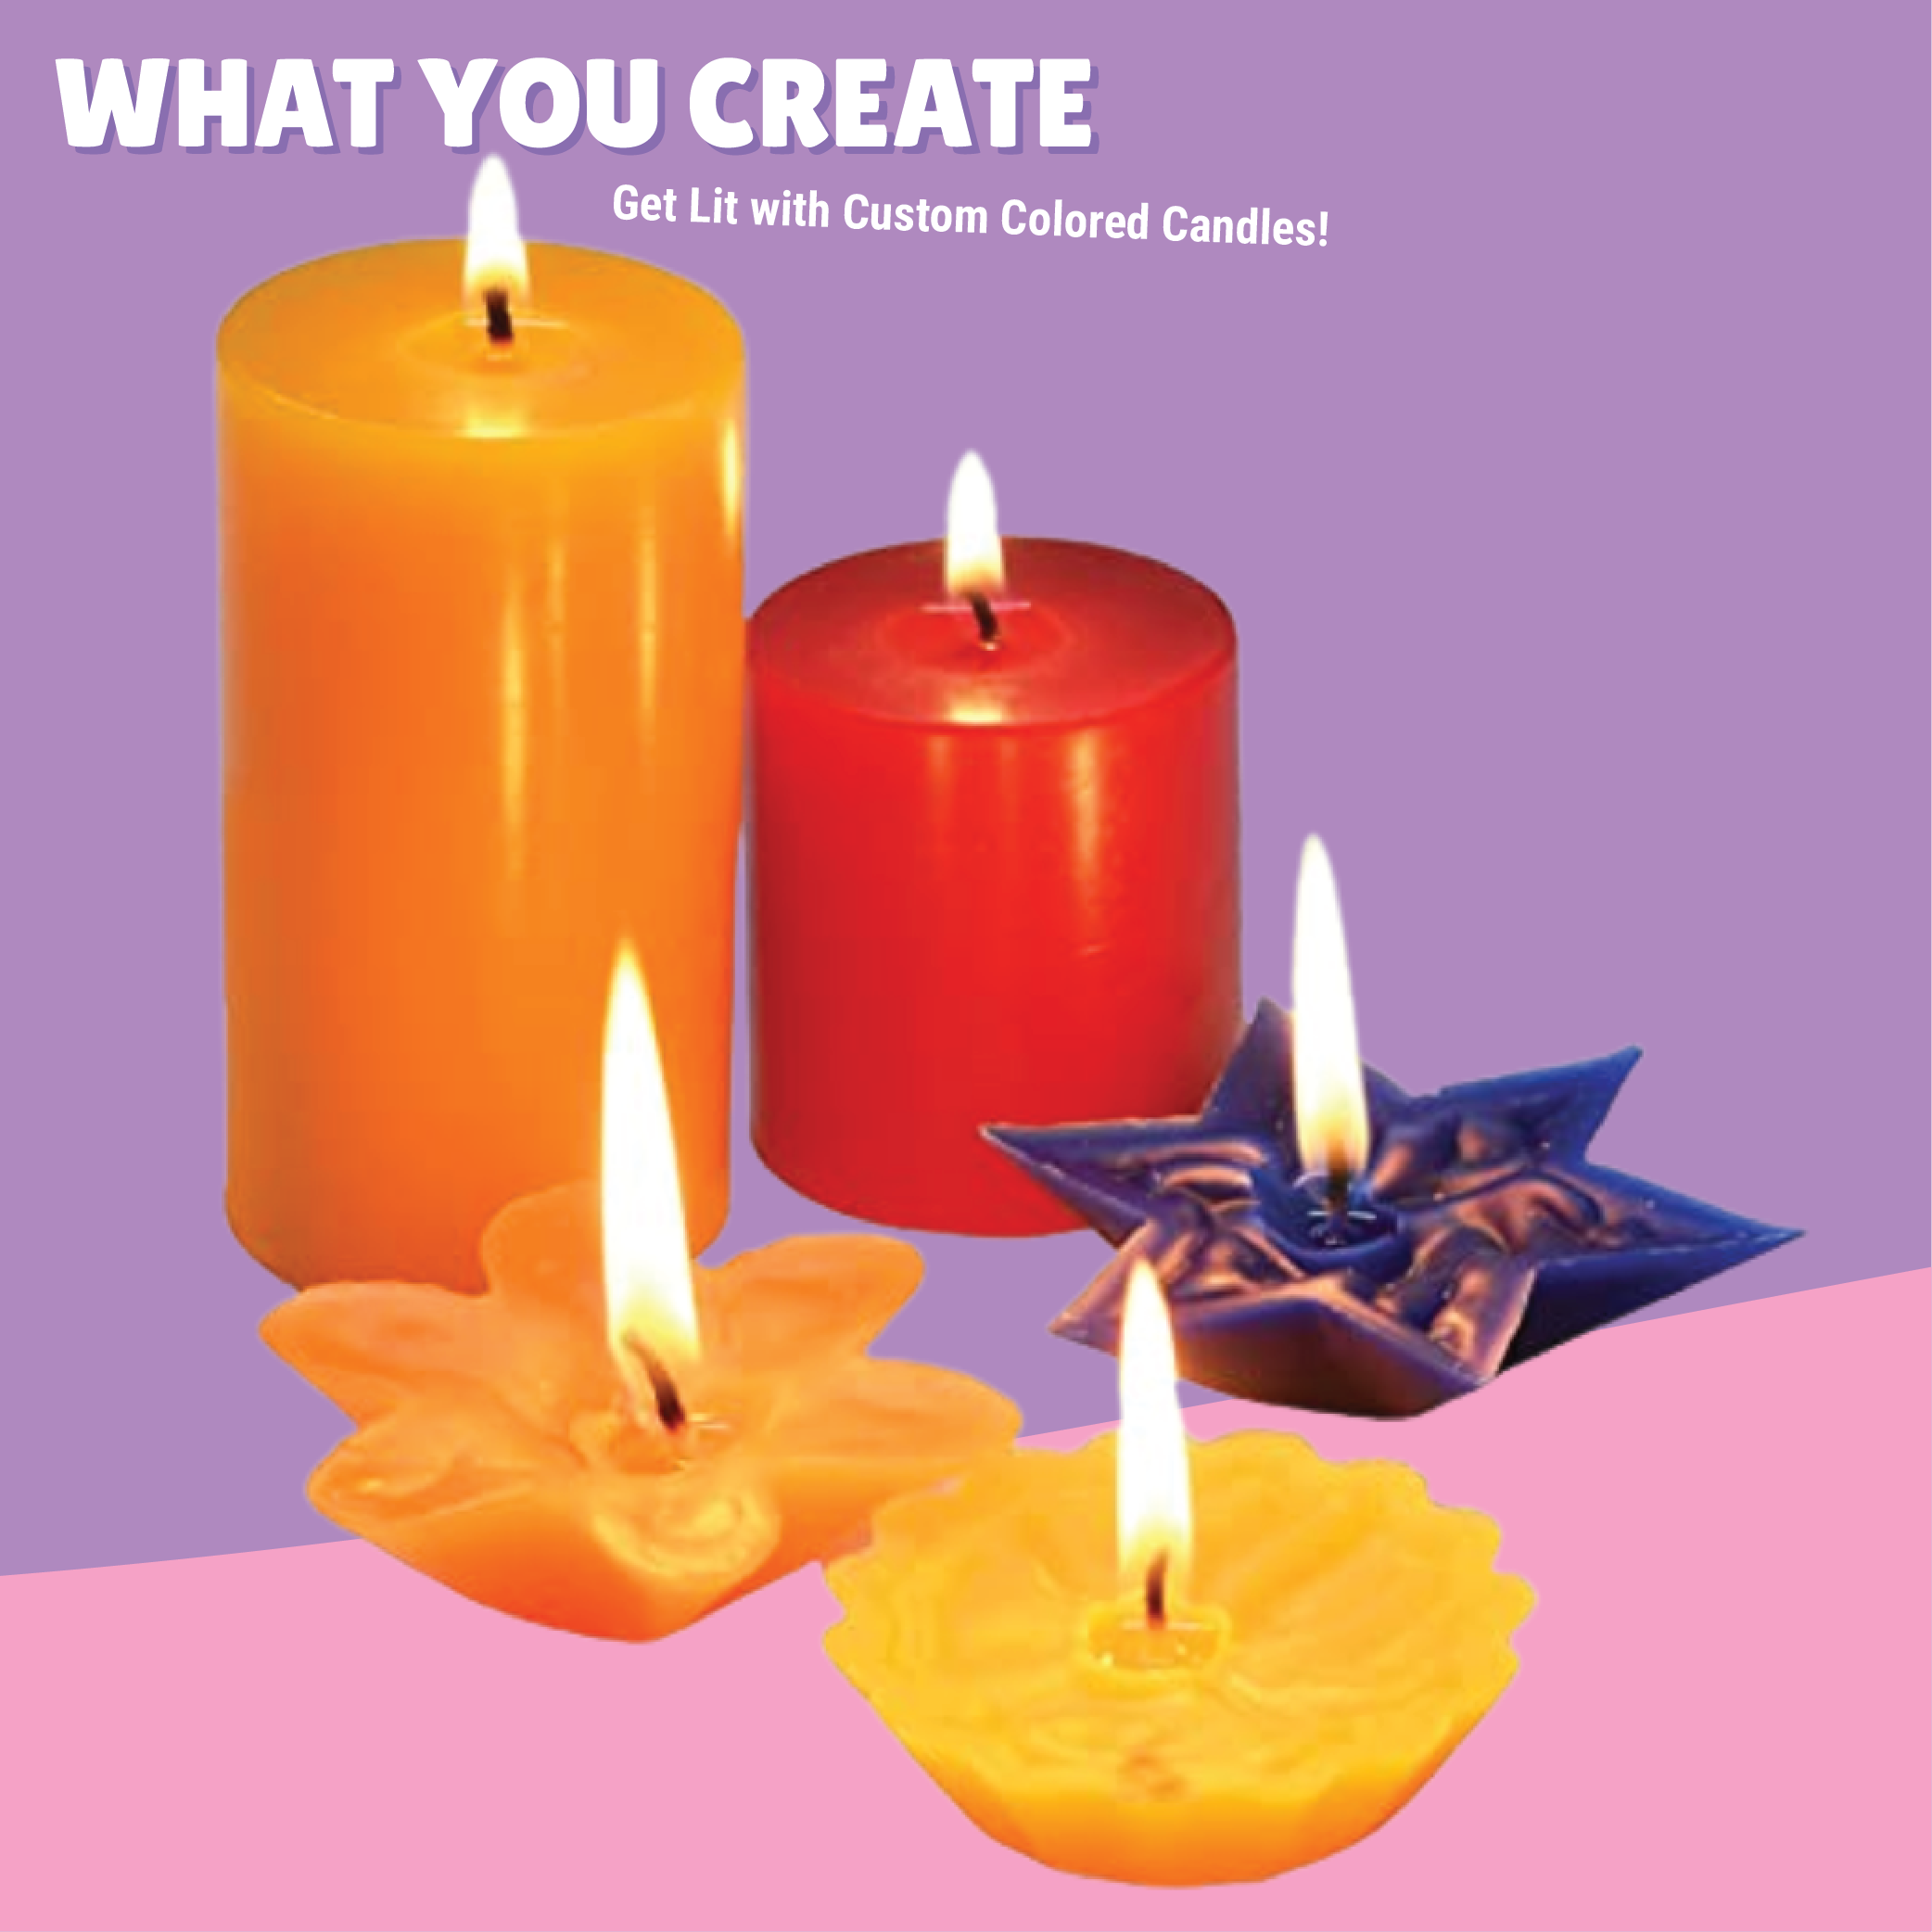 Colored Candle Making Kit